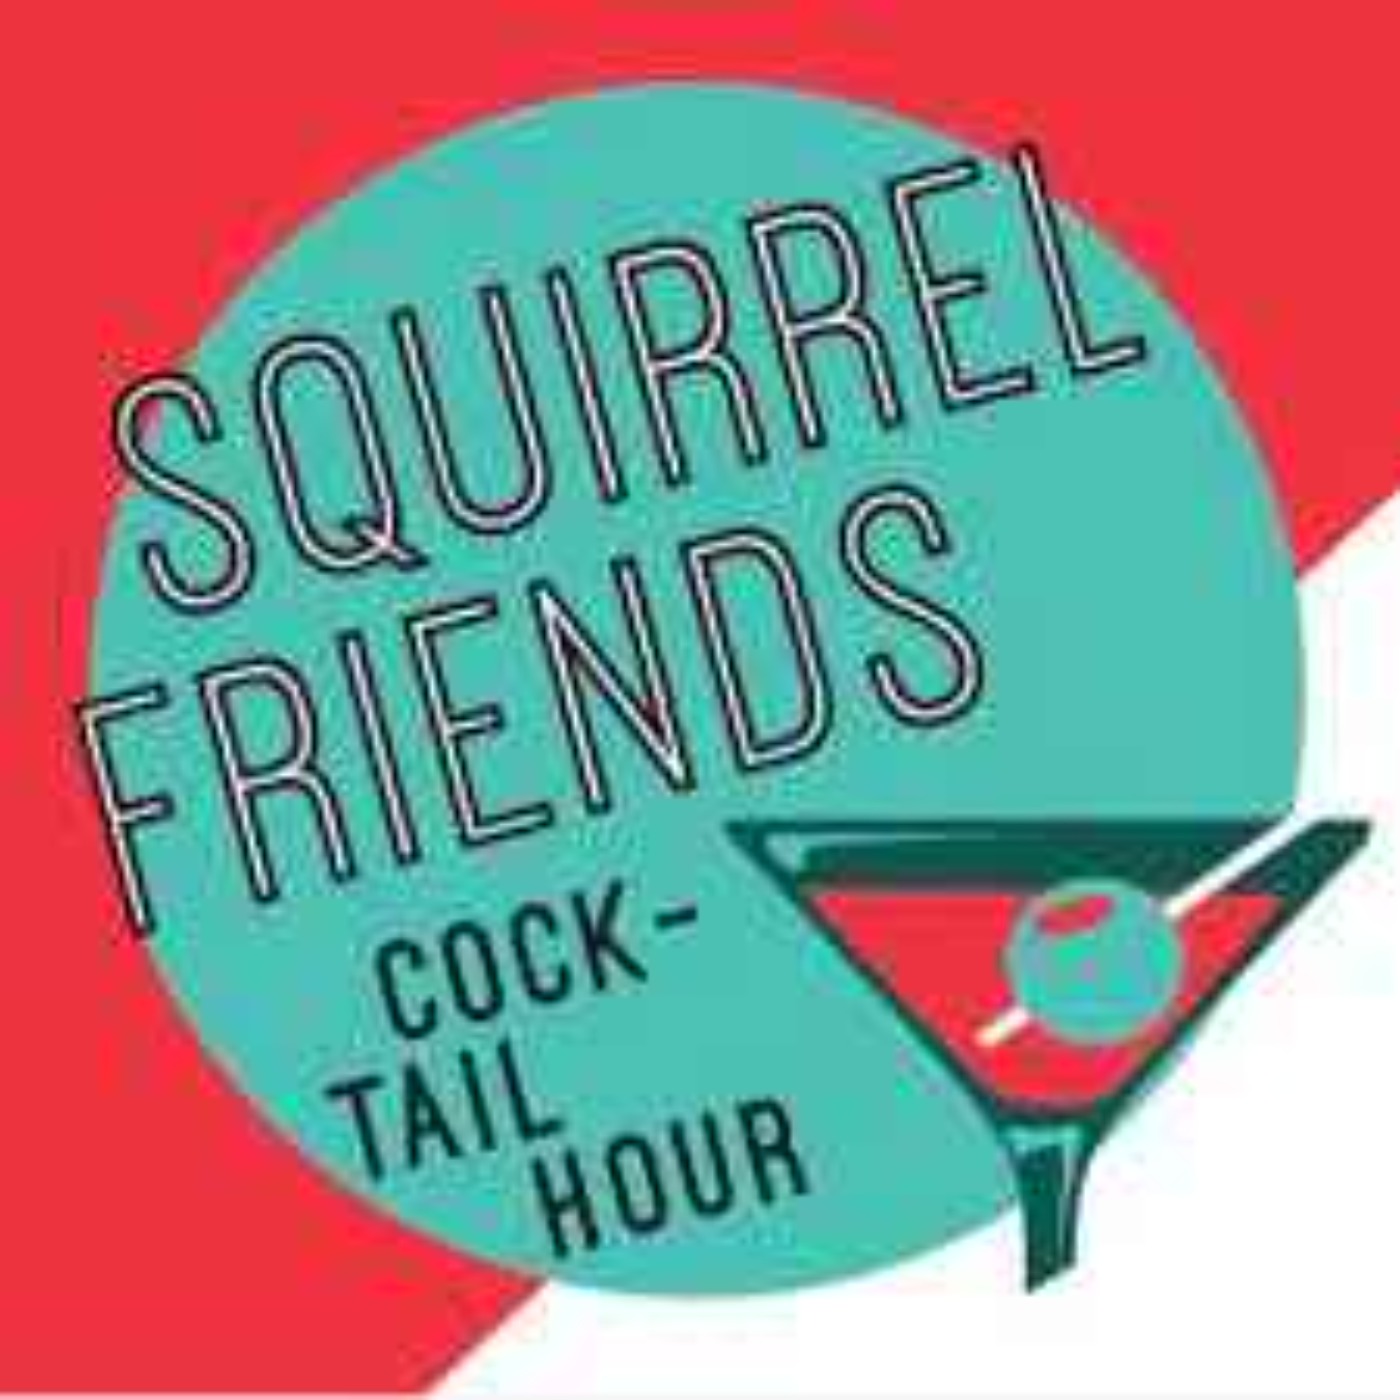 Squirrel Friends Cocktail Hour: All Stars 8